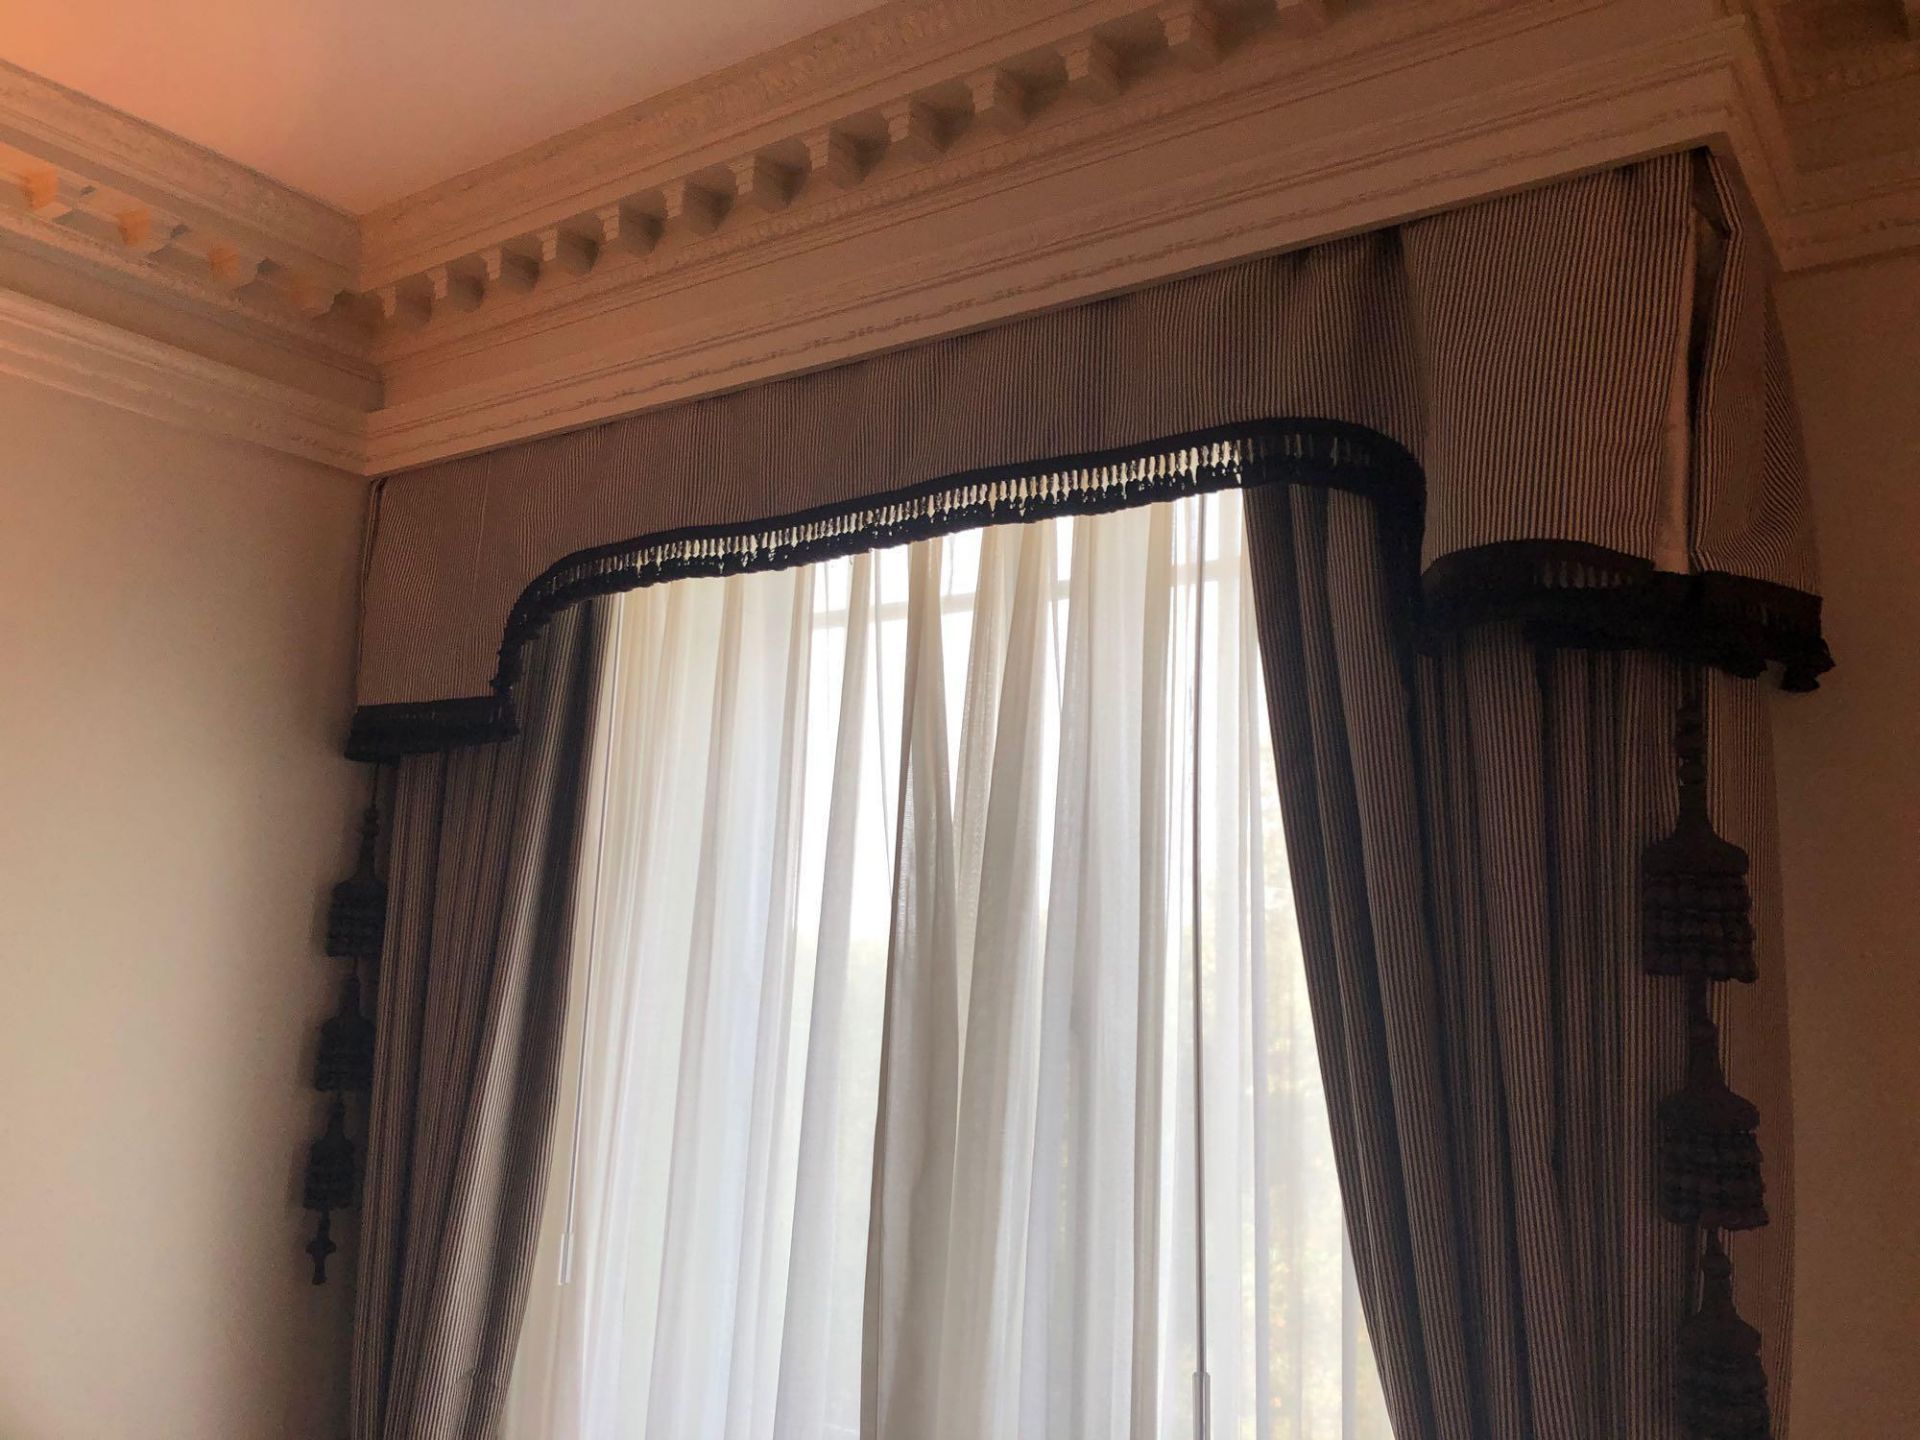 A Pair Of Drapes Fabric In Brown And White Striped Complete With Pelmet And Tassels 257 x 180cm ( - Image 2 of 4